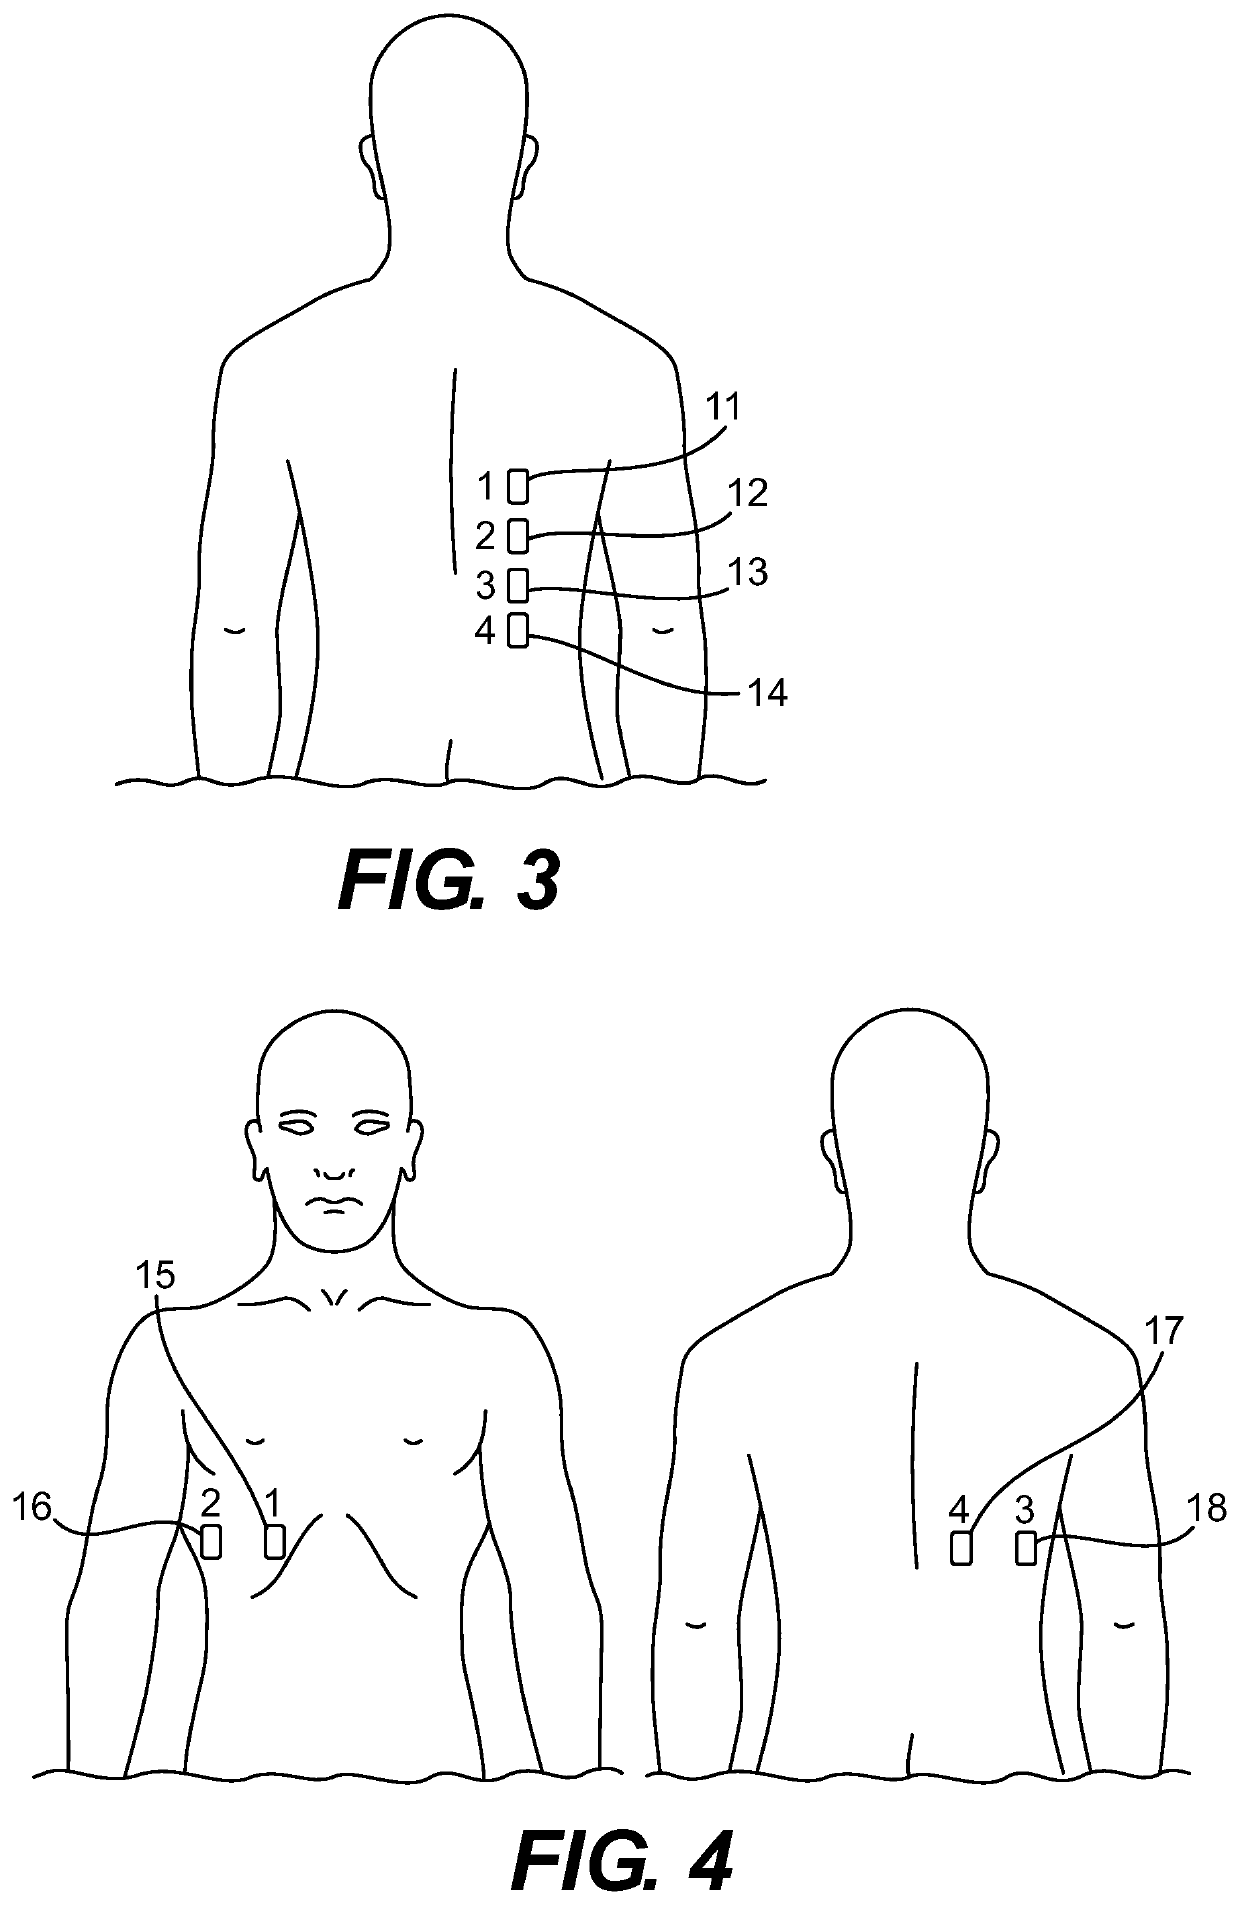 Devices and methods for respiratory variation monitoring by measurement of respiratory volumes, motion and variability